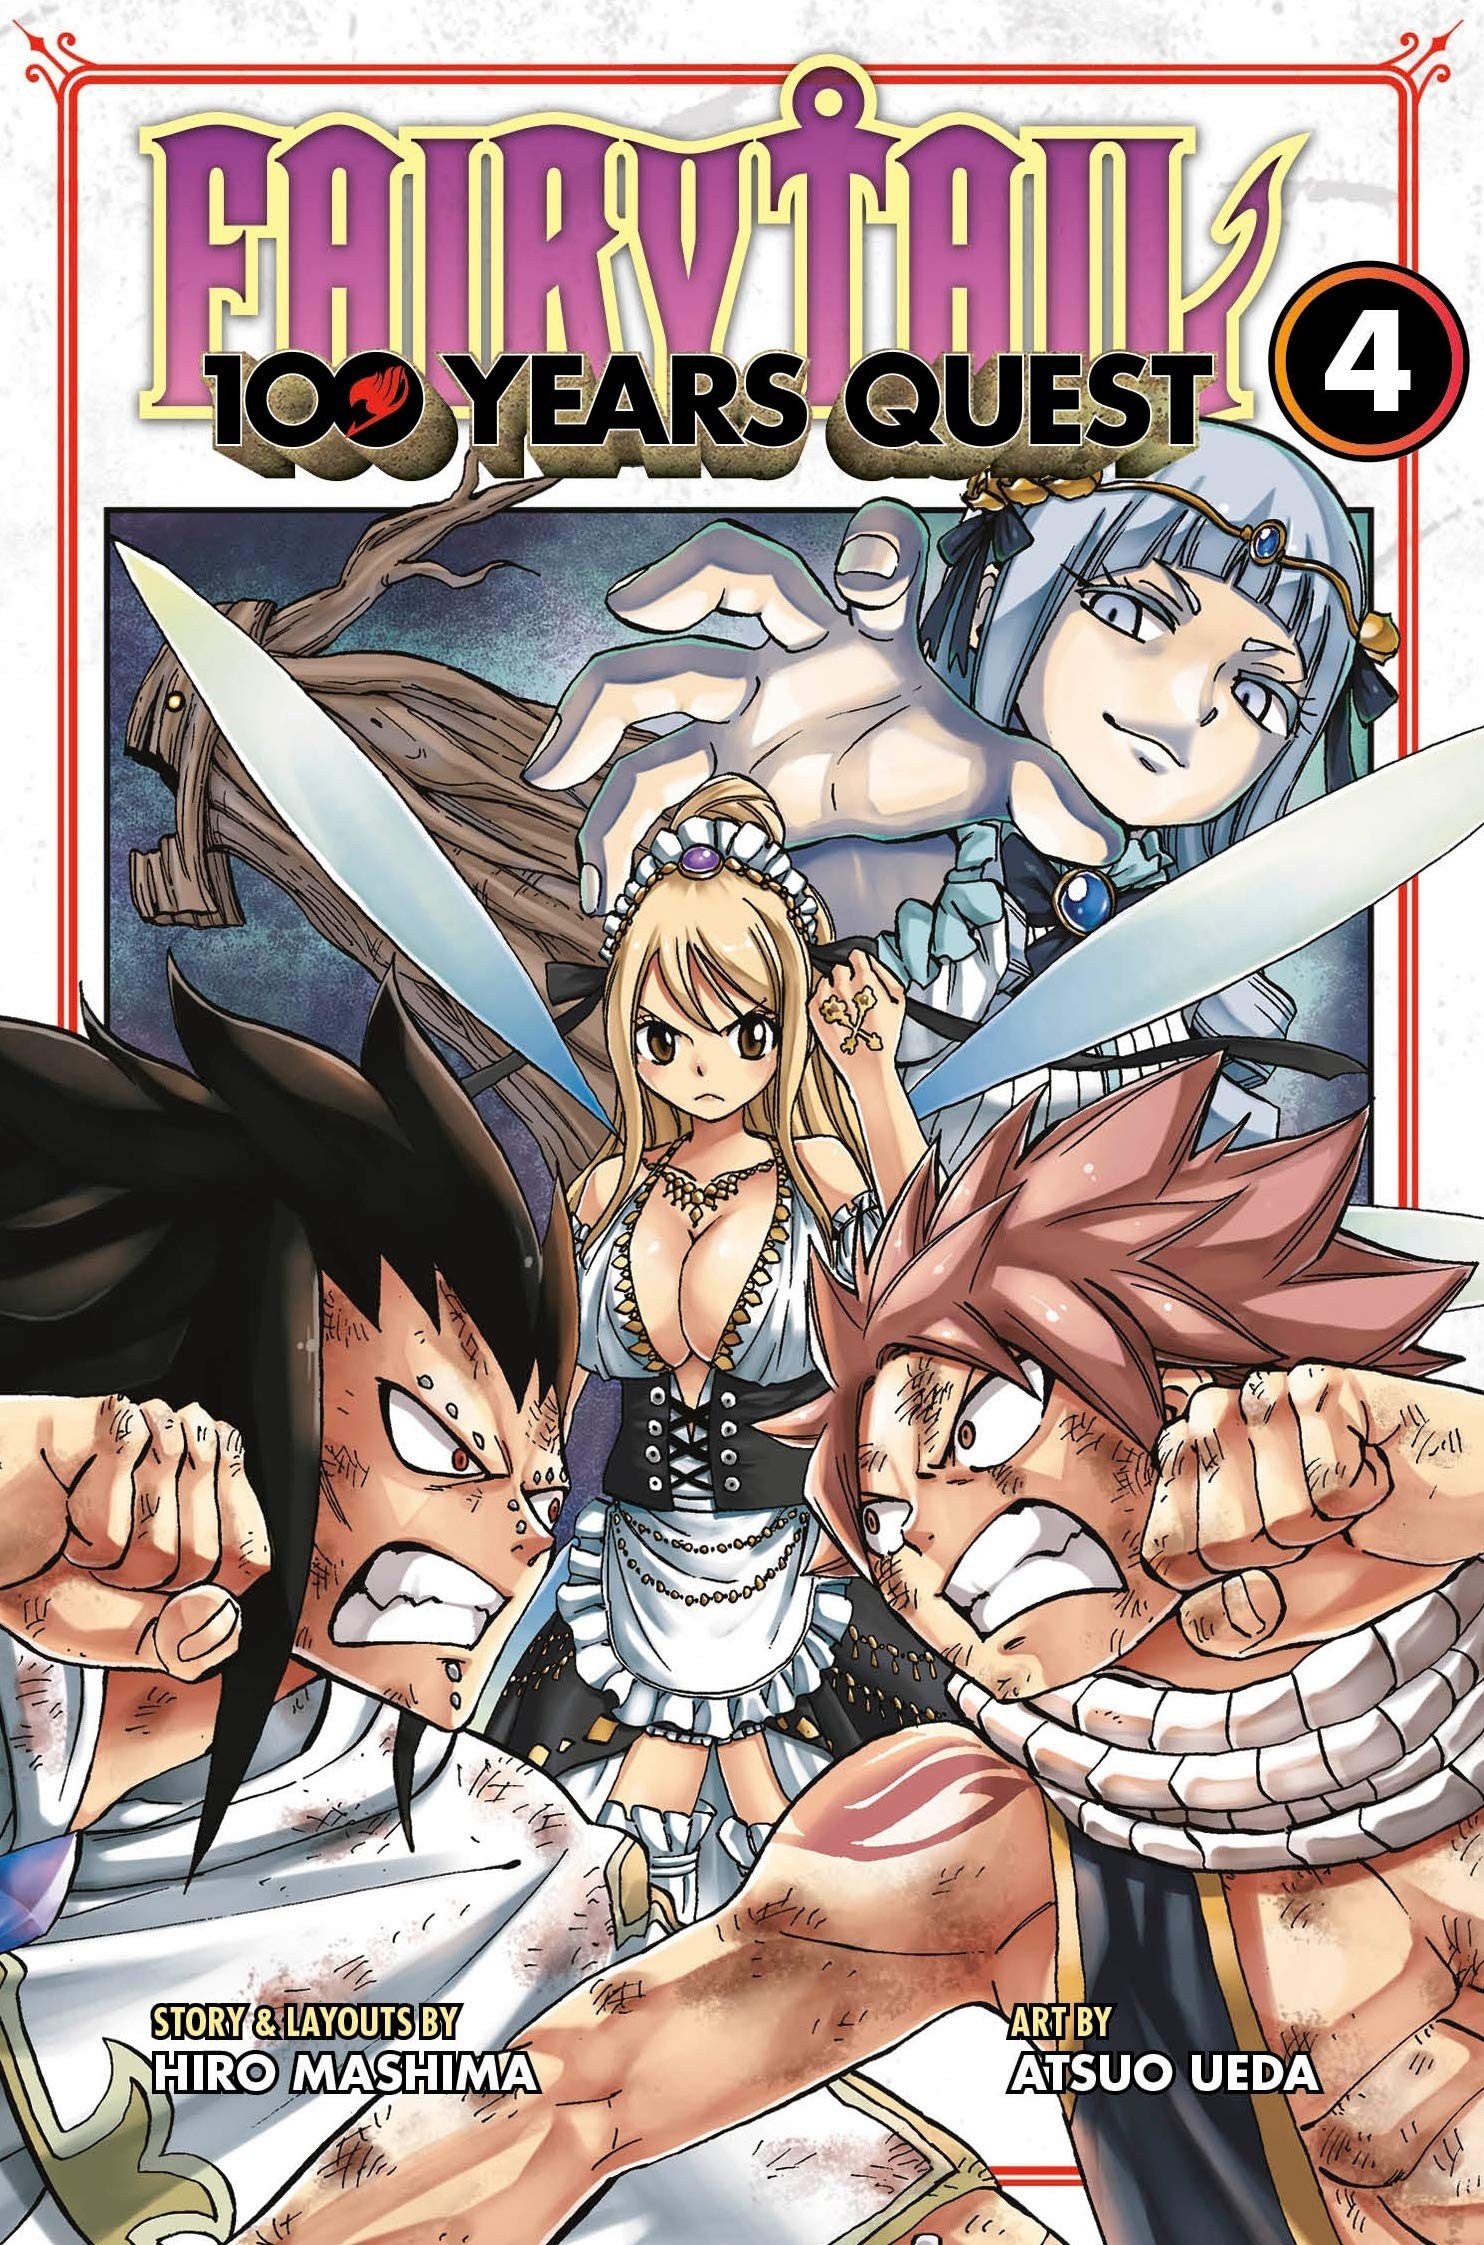 Fairy Tail, 100 years Quest Vol. 04